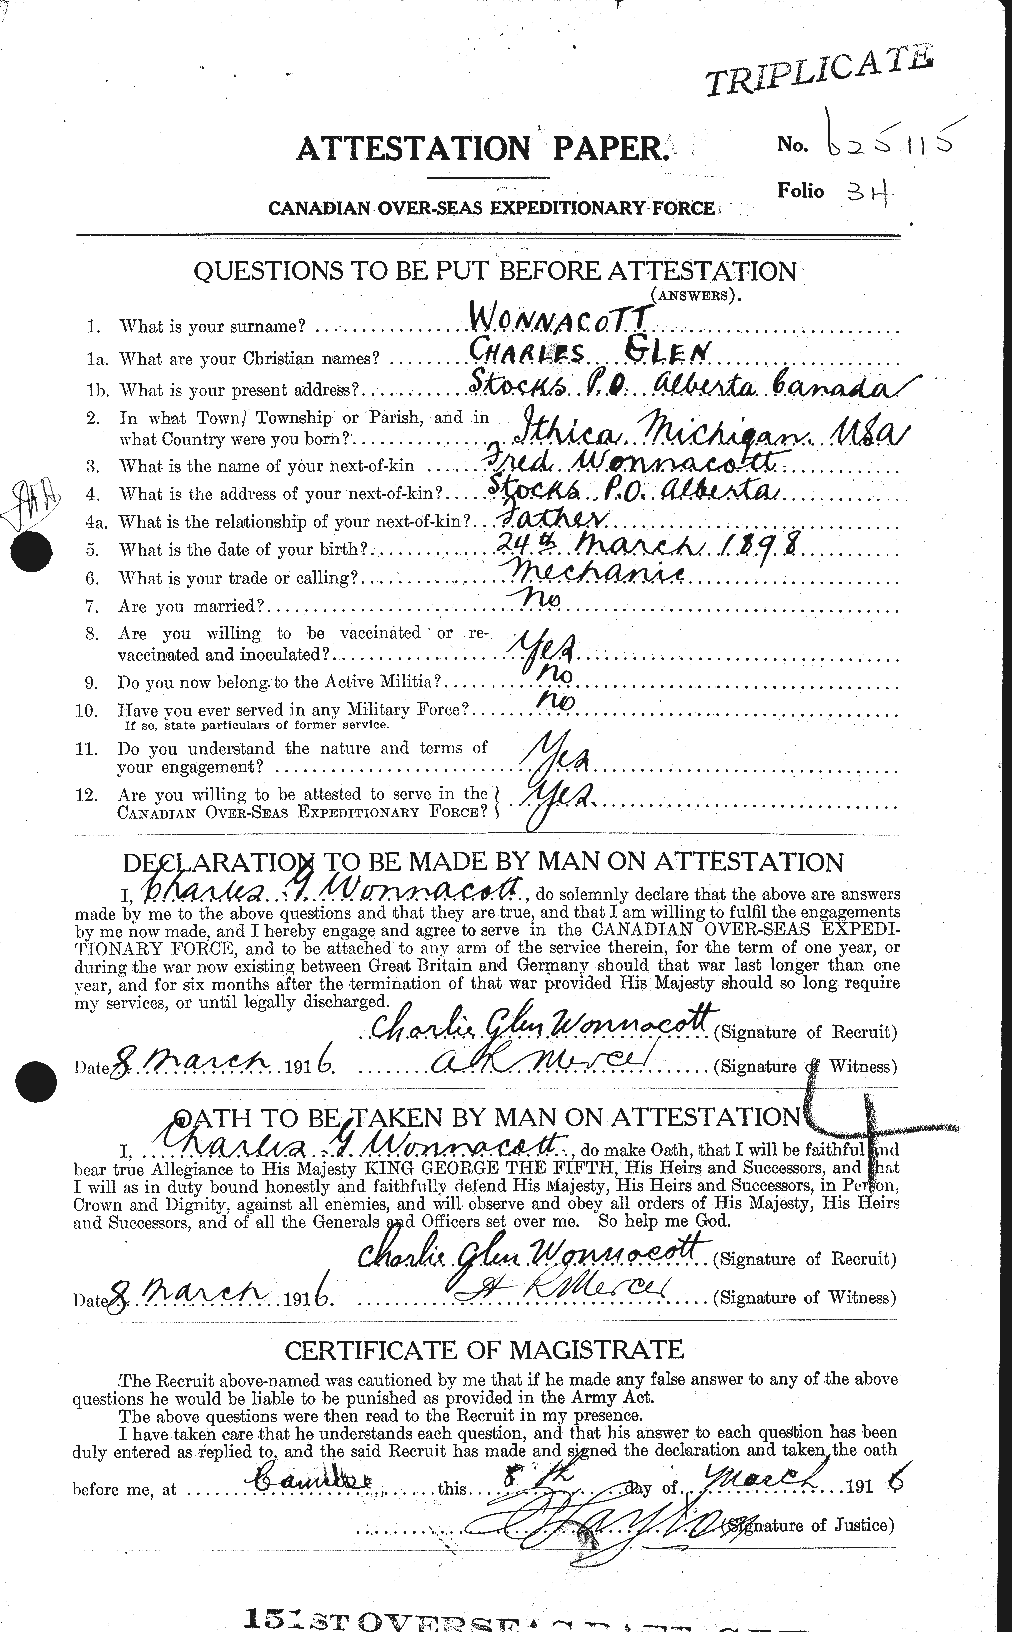 Personnel Records of the First World War - CEF 683779a